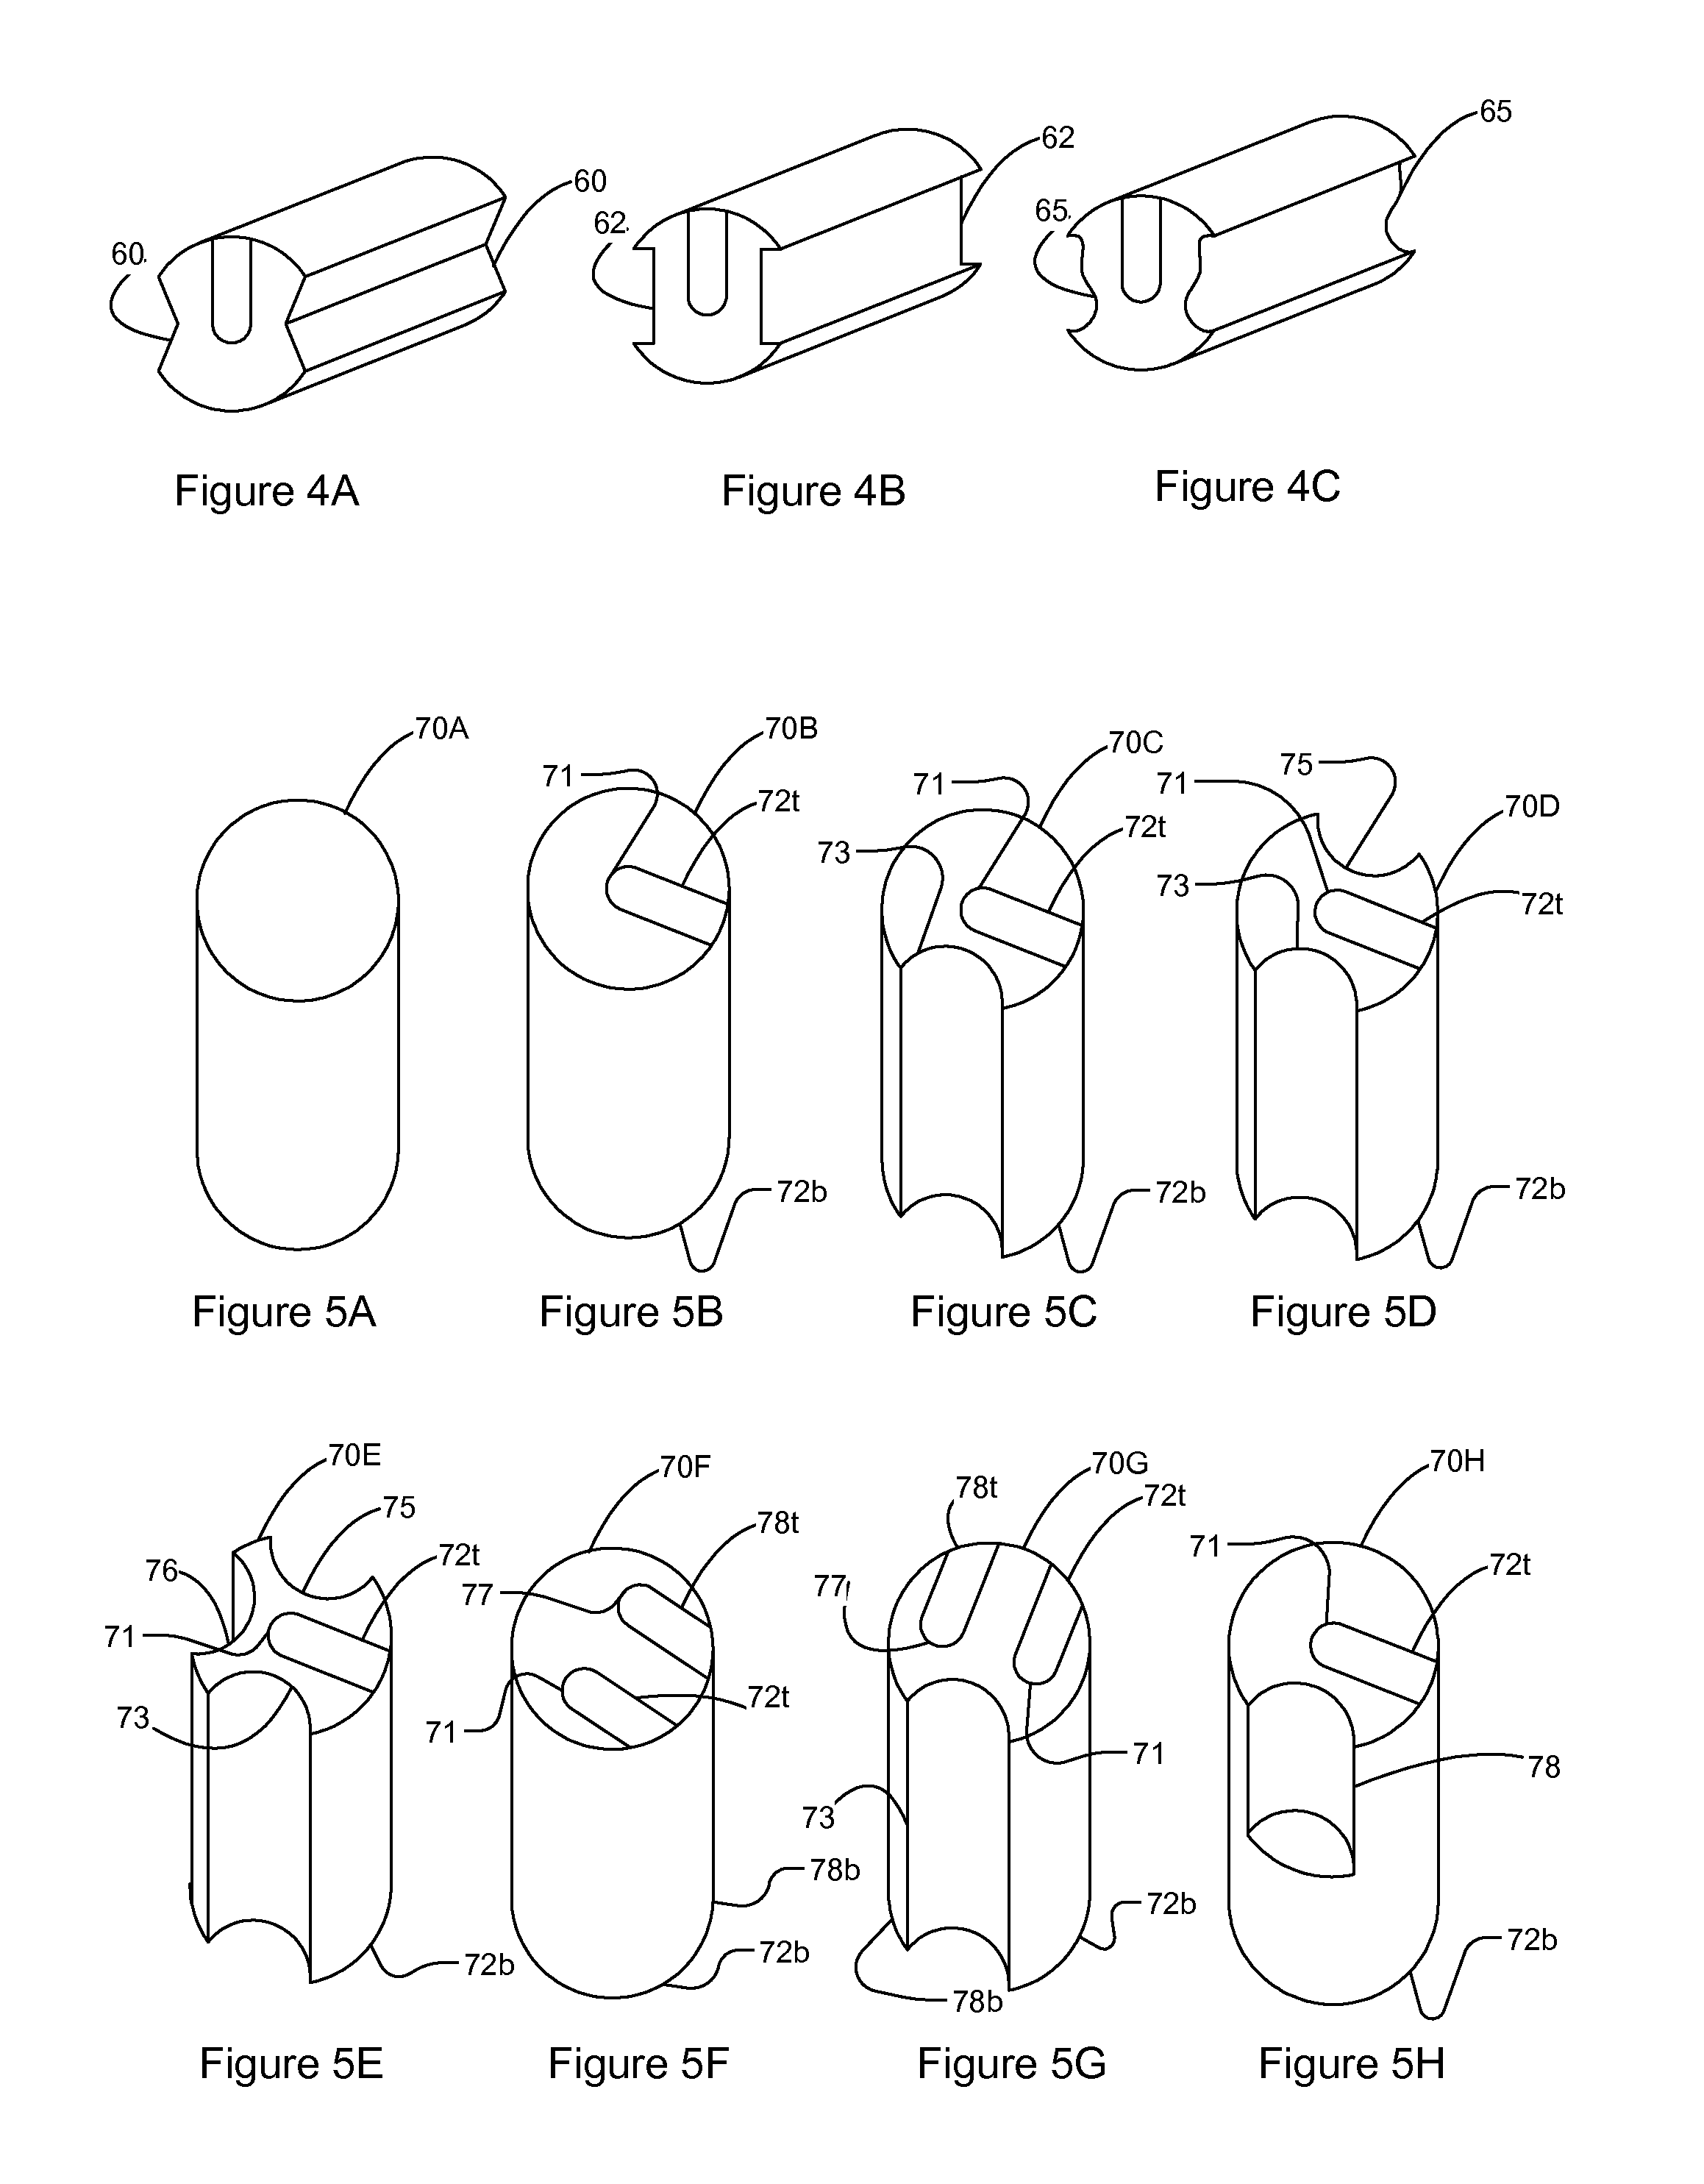 Continuous Extrusion Process for Manufacturing a Z-directed Component for a Printed Circuit Board